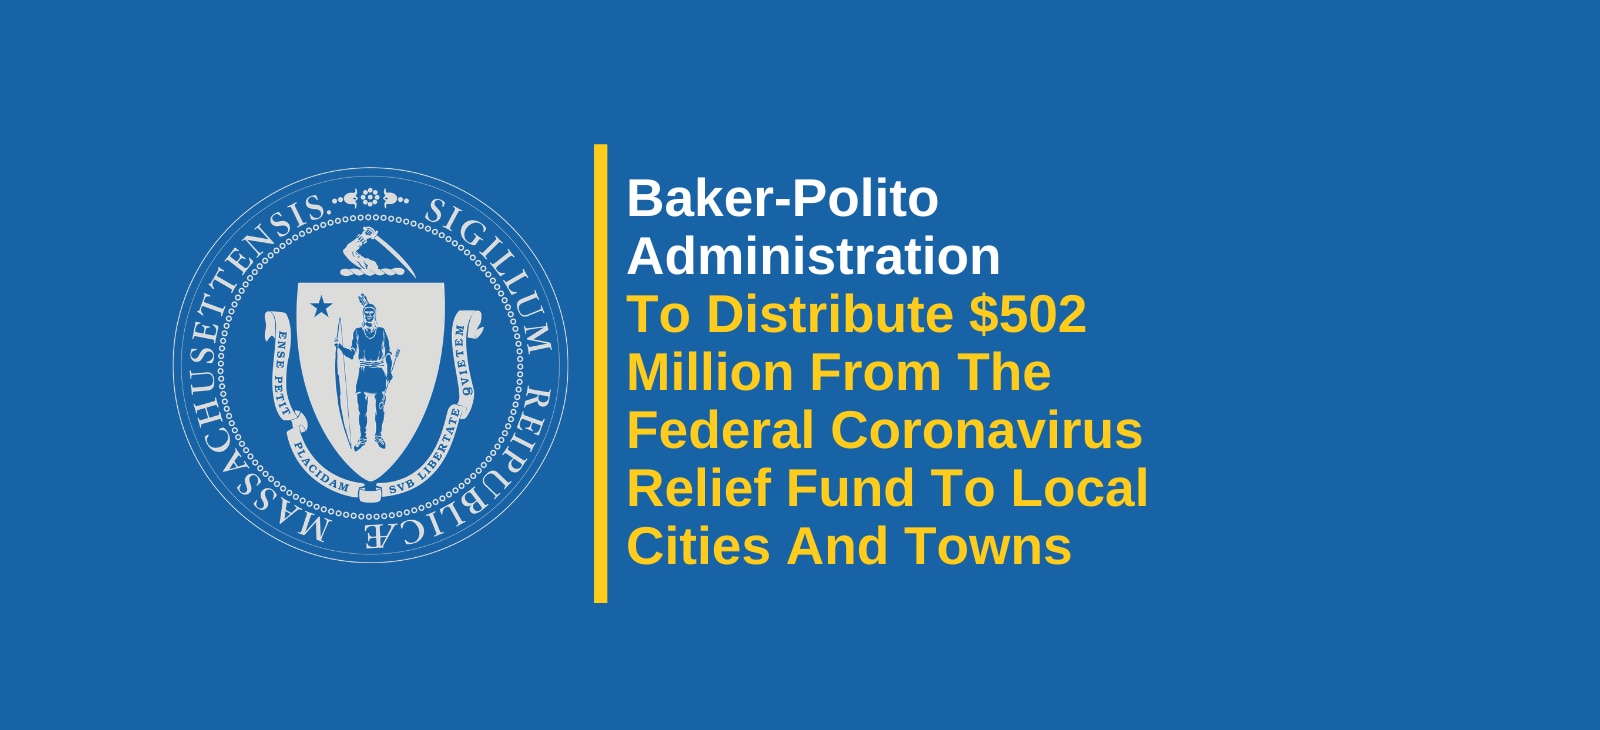 Baker-Polito Administration to Distribute $502 Million from the Federal Coronavirus Relief Fund to Local Cities and Towns